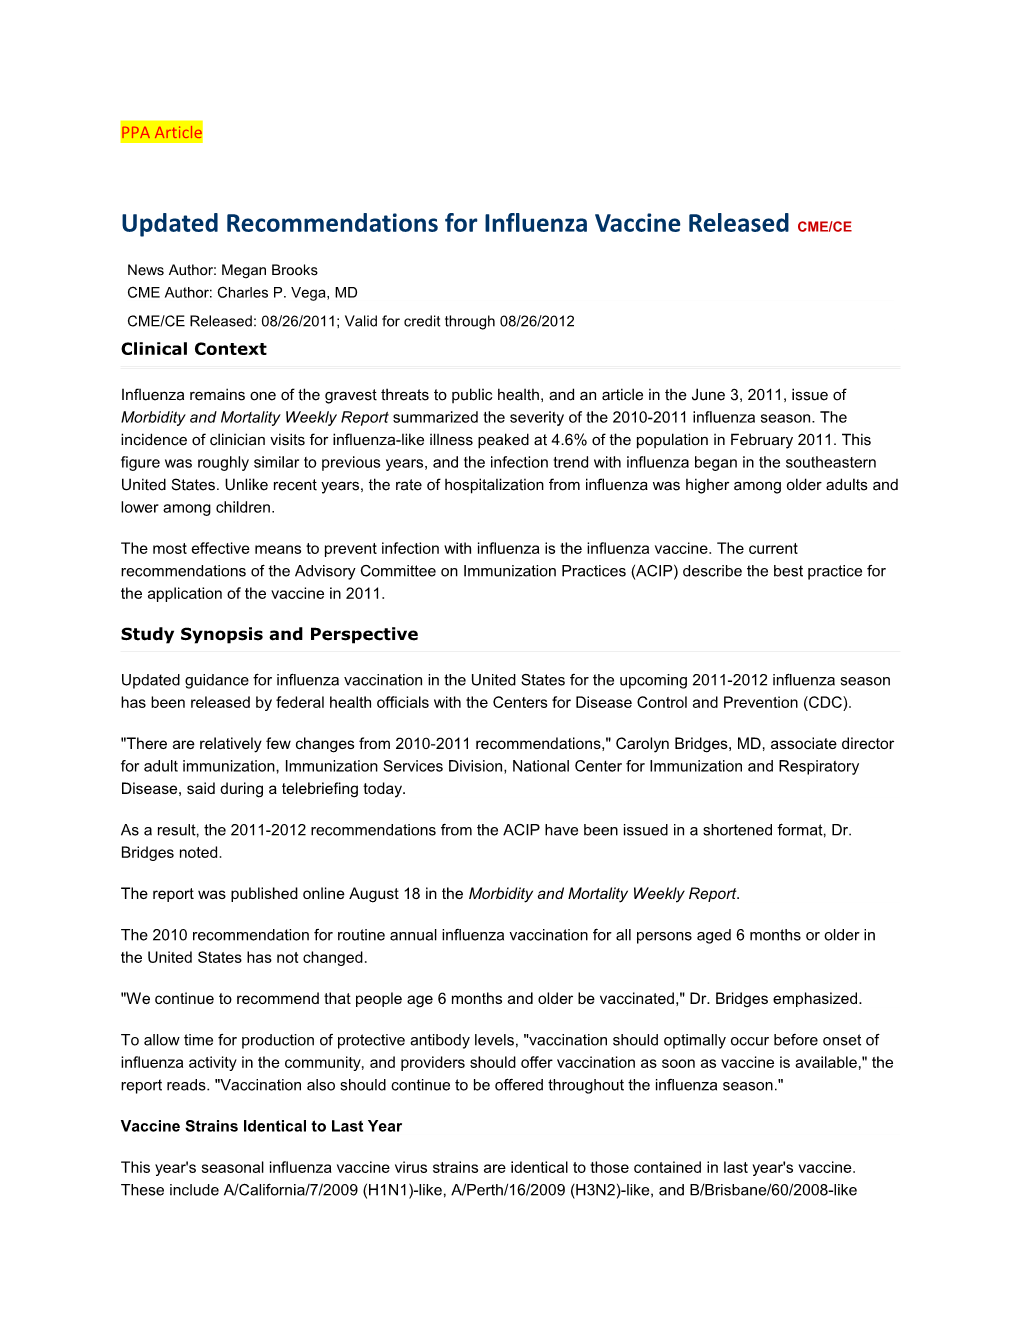 Updated Recommendations for Influenza Vaccine Released CME/CE